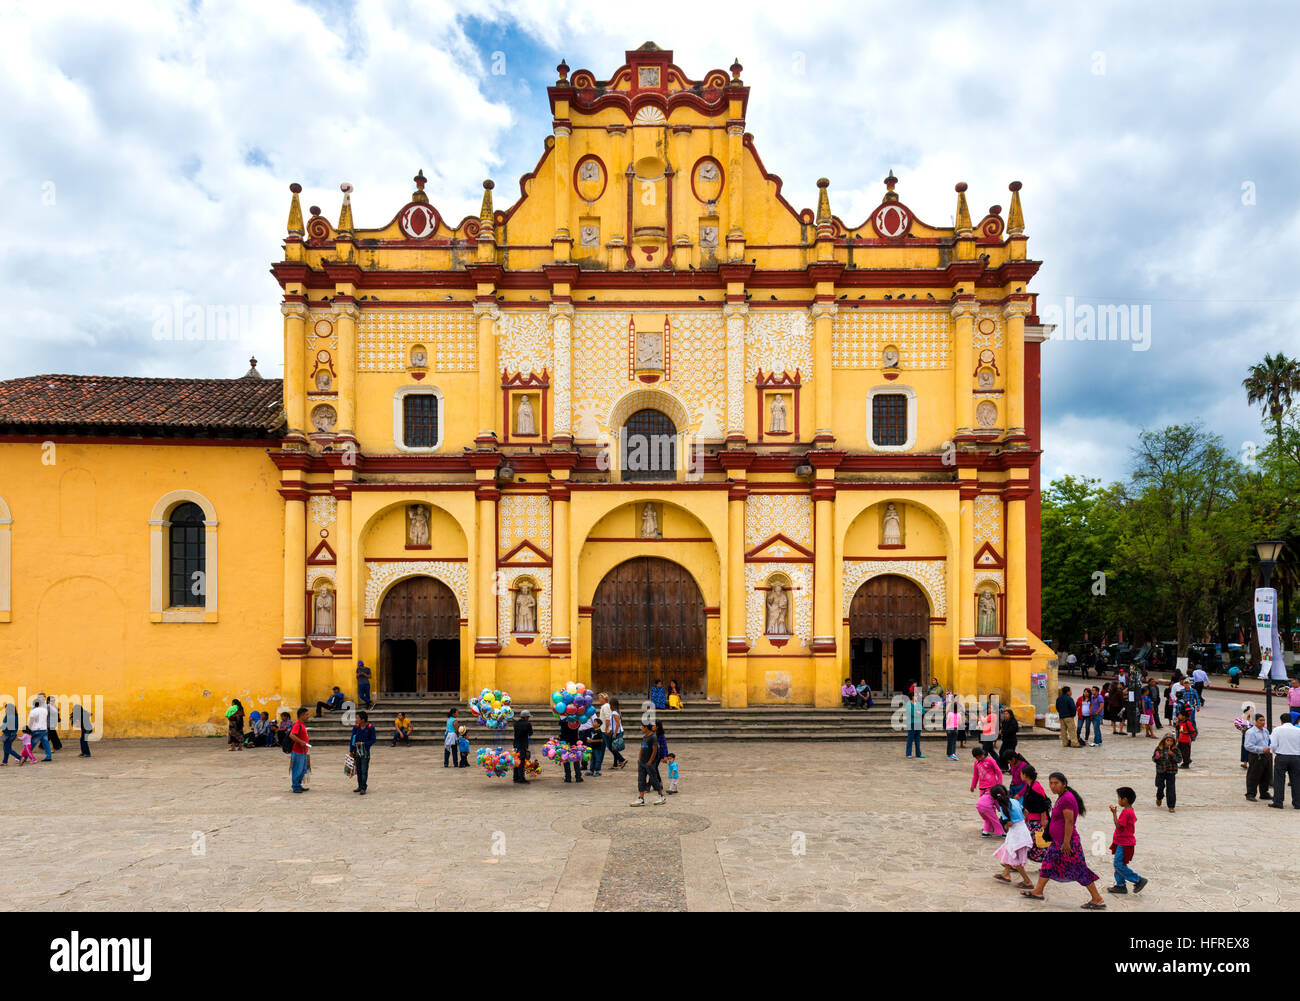 San Cristóbal de Las Casas, Mexico - May 10, 2014: View of the main square and Cathedral in the city of San Cristóbal de Las Casas Stock Photo